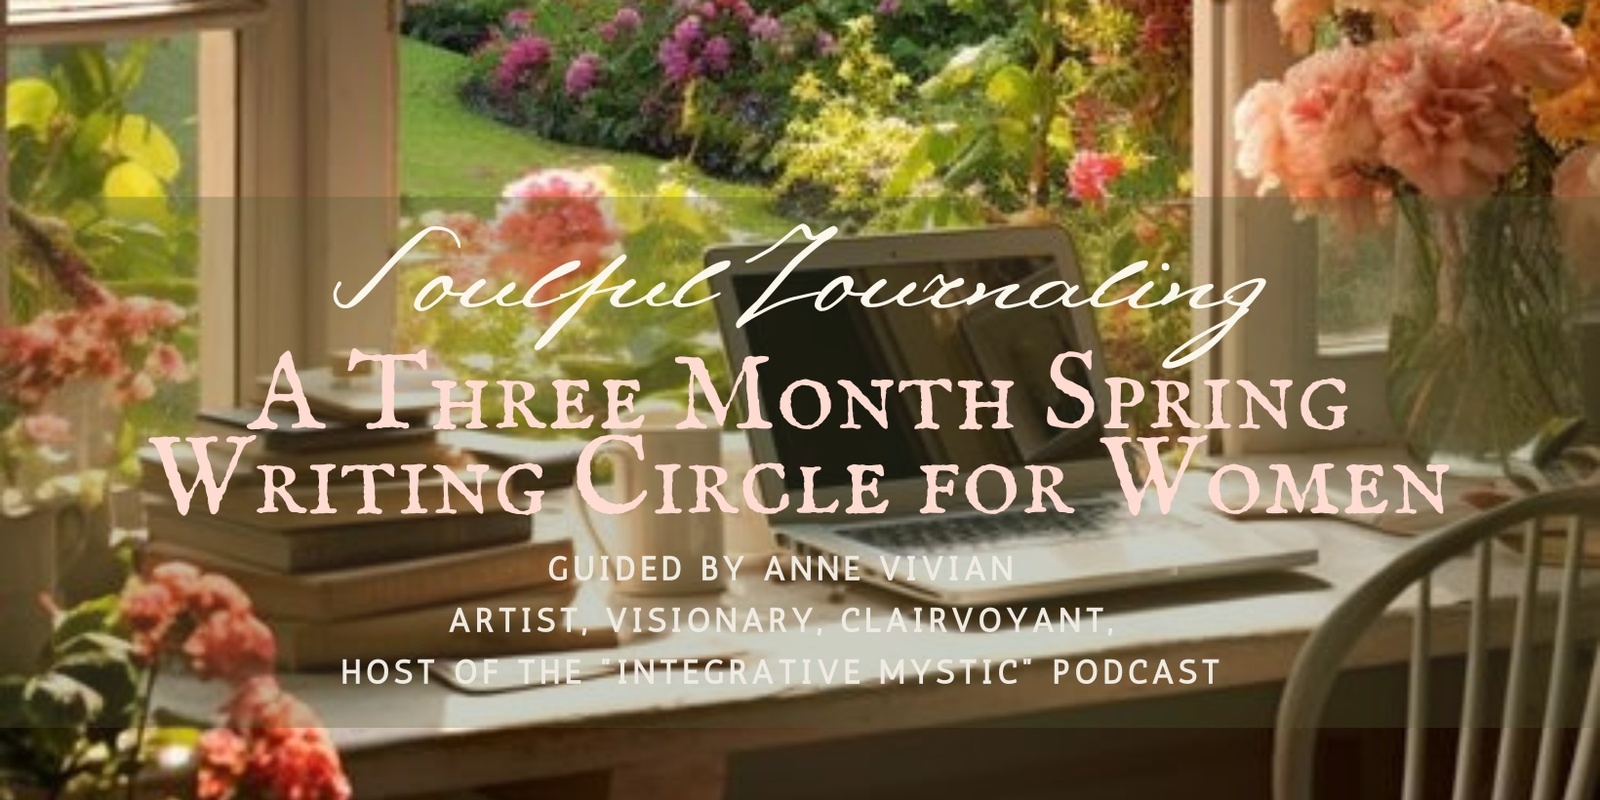 Banner image for Soulful Journaling: A Three Month Spring Writing Circle for Women (VIRTUAL)